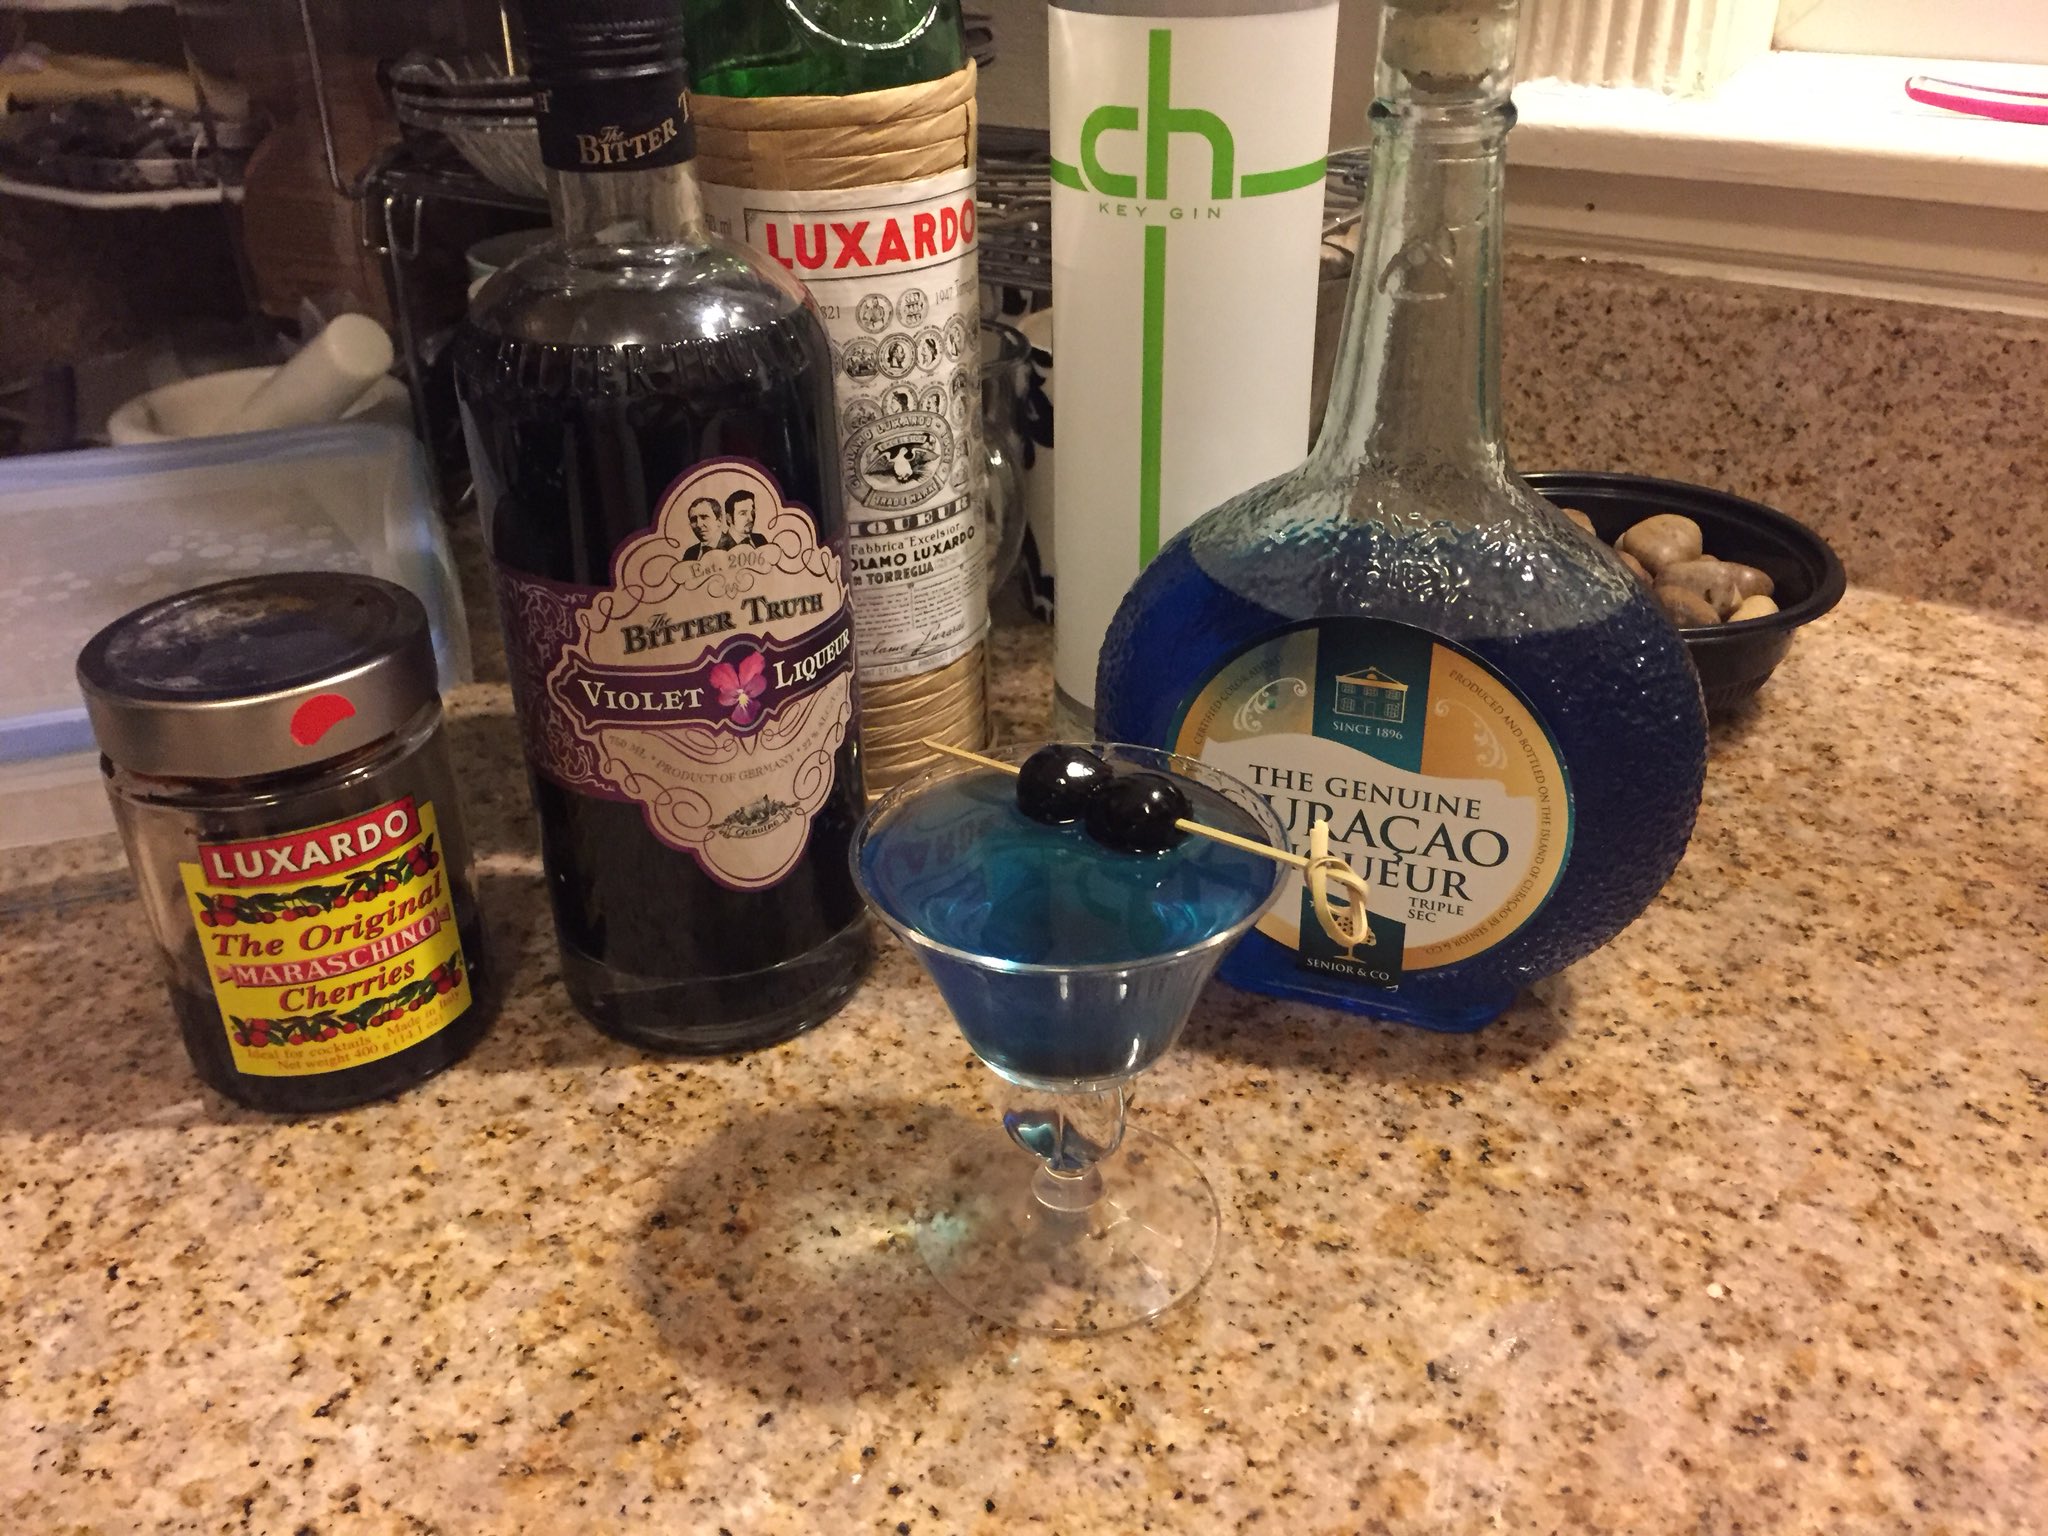 Blue cocktail in a small nick-and-nora style couple glass, with two dark cherries on top.

A bottle of violet liquor and curacao are behind them. There is a jar of cocktail cherries.